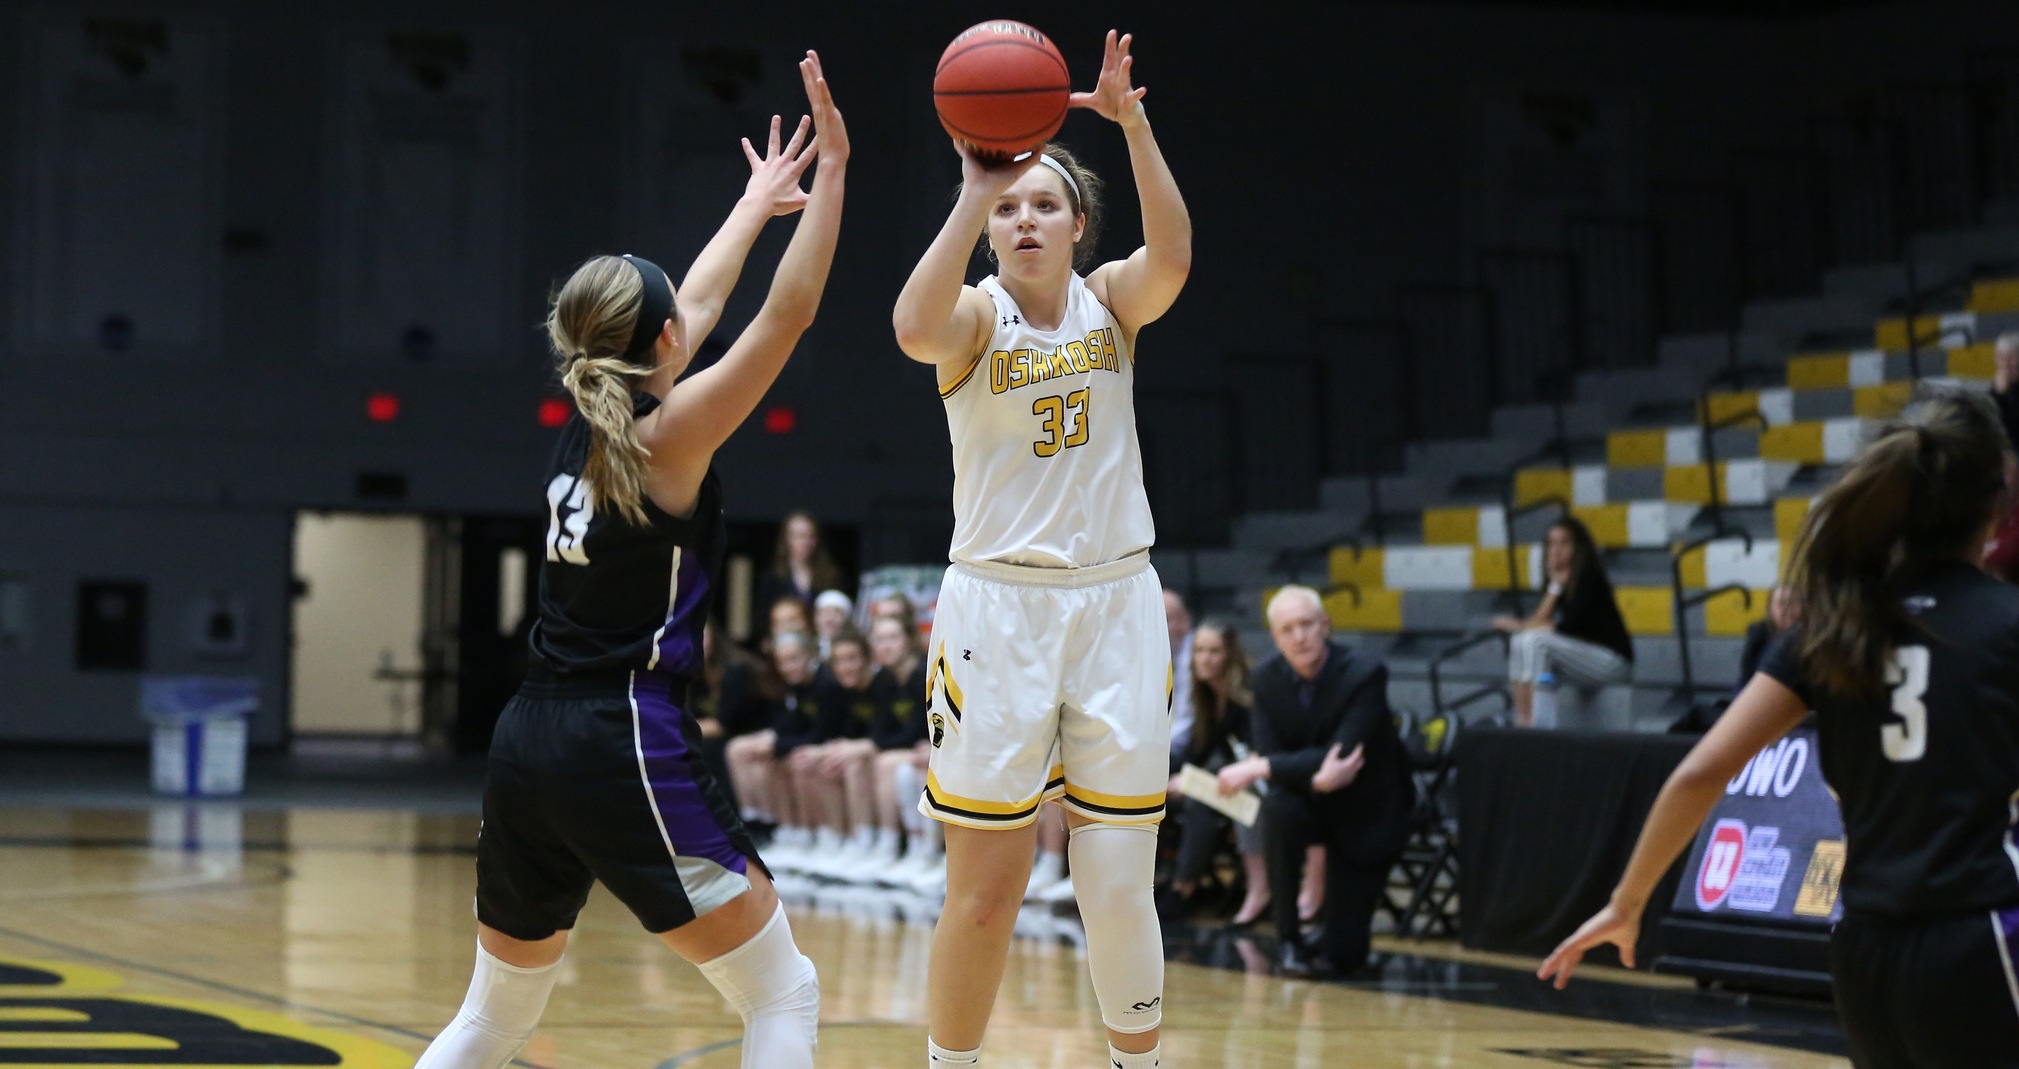 Nikki Arneson scored nine of her 11 points against the Warhawks in the fourth quarter.